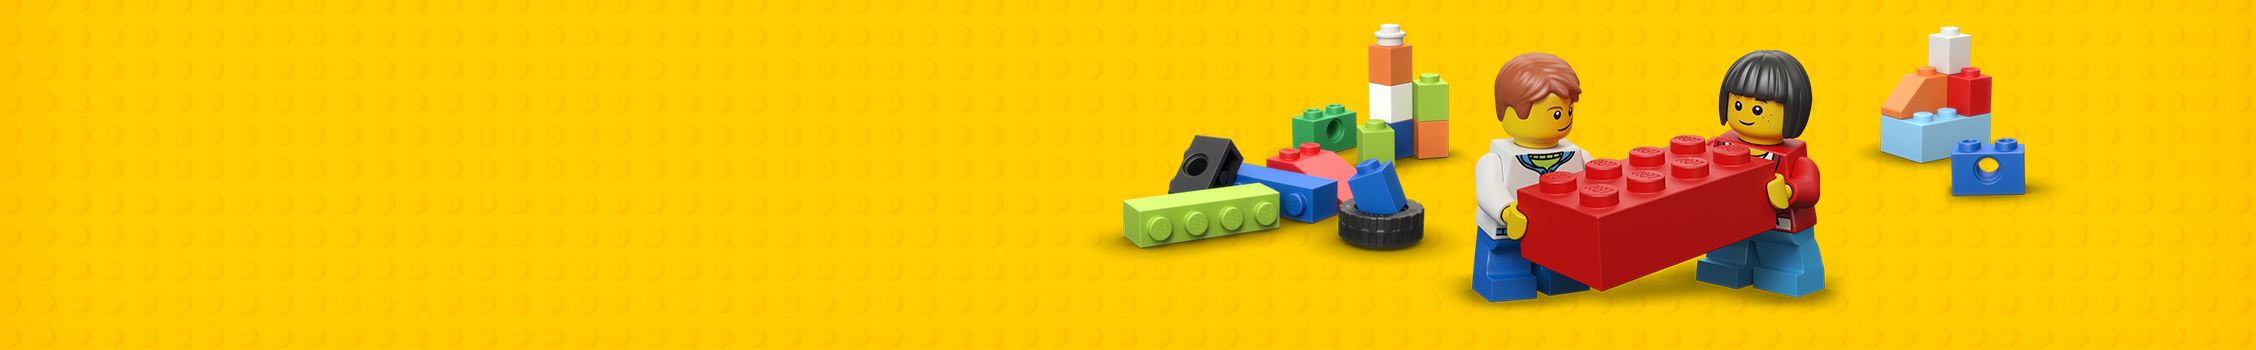 LEGO: The bricks global supply chain? - Technology and Operations Management